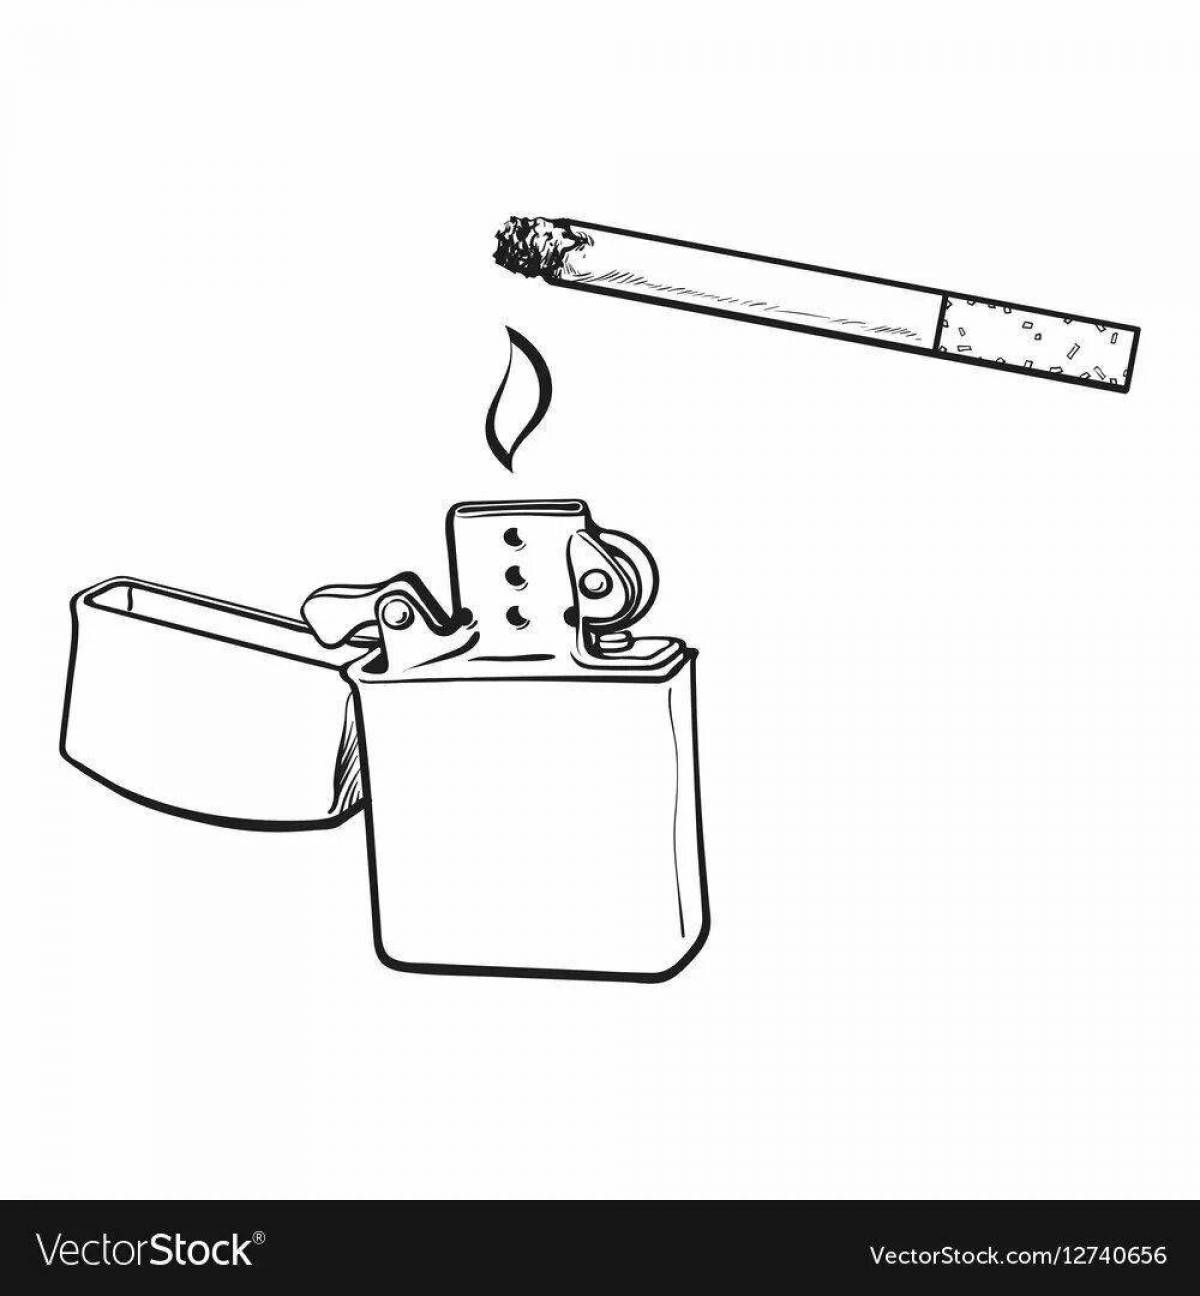 Carbonated cigarette coloring page